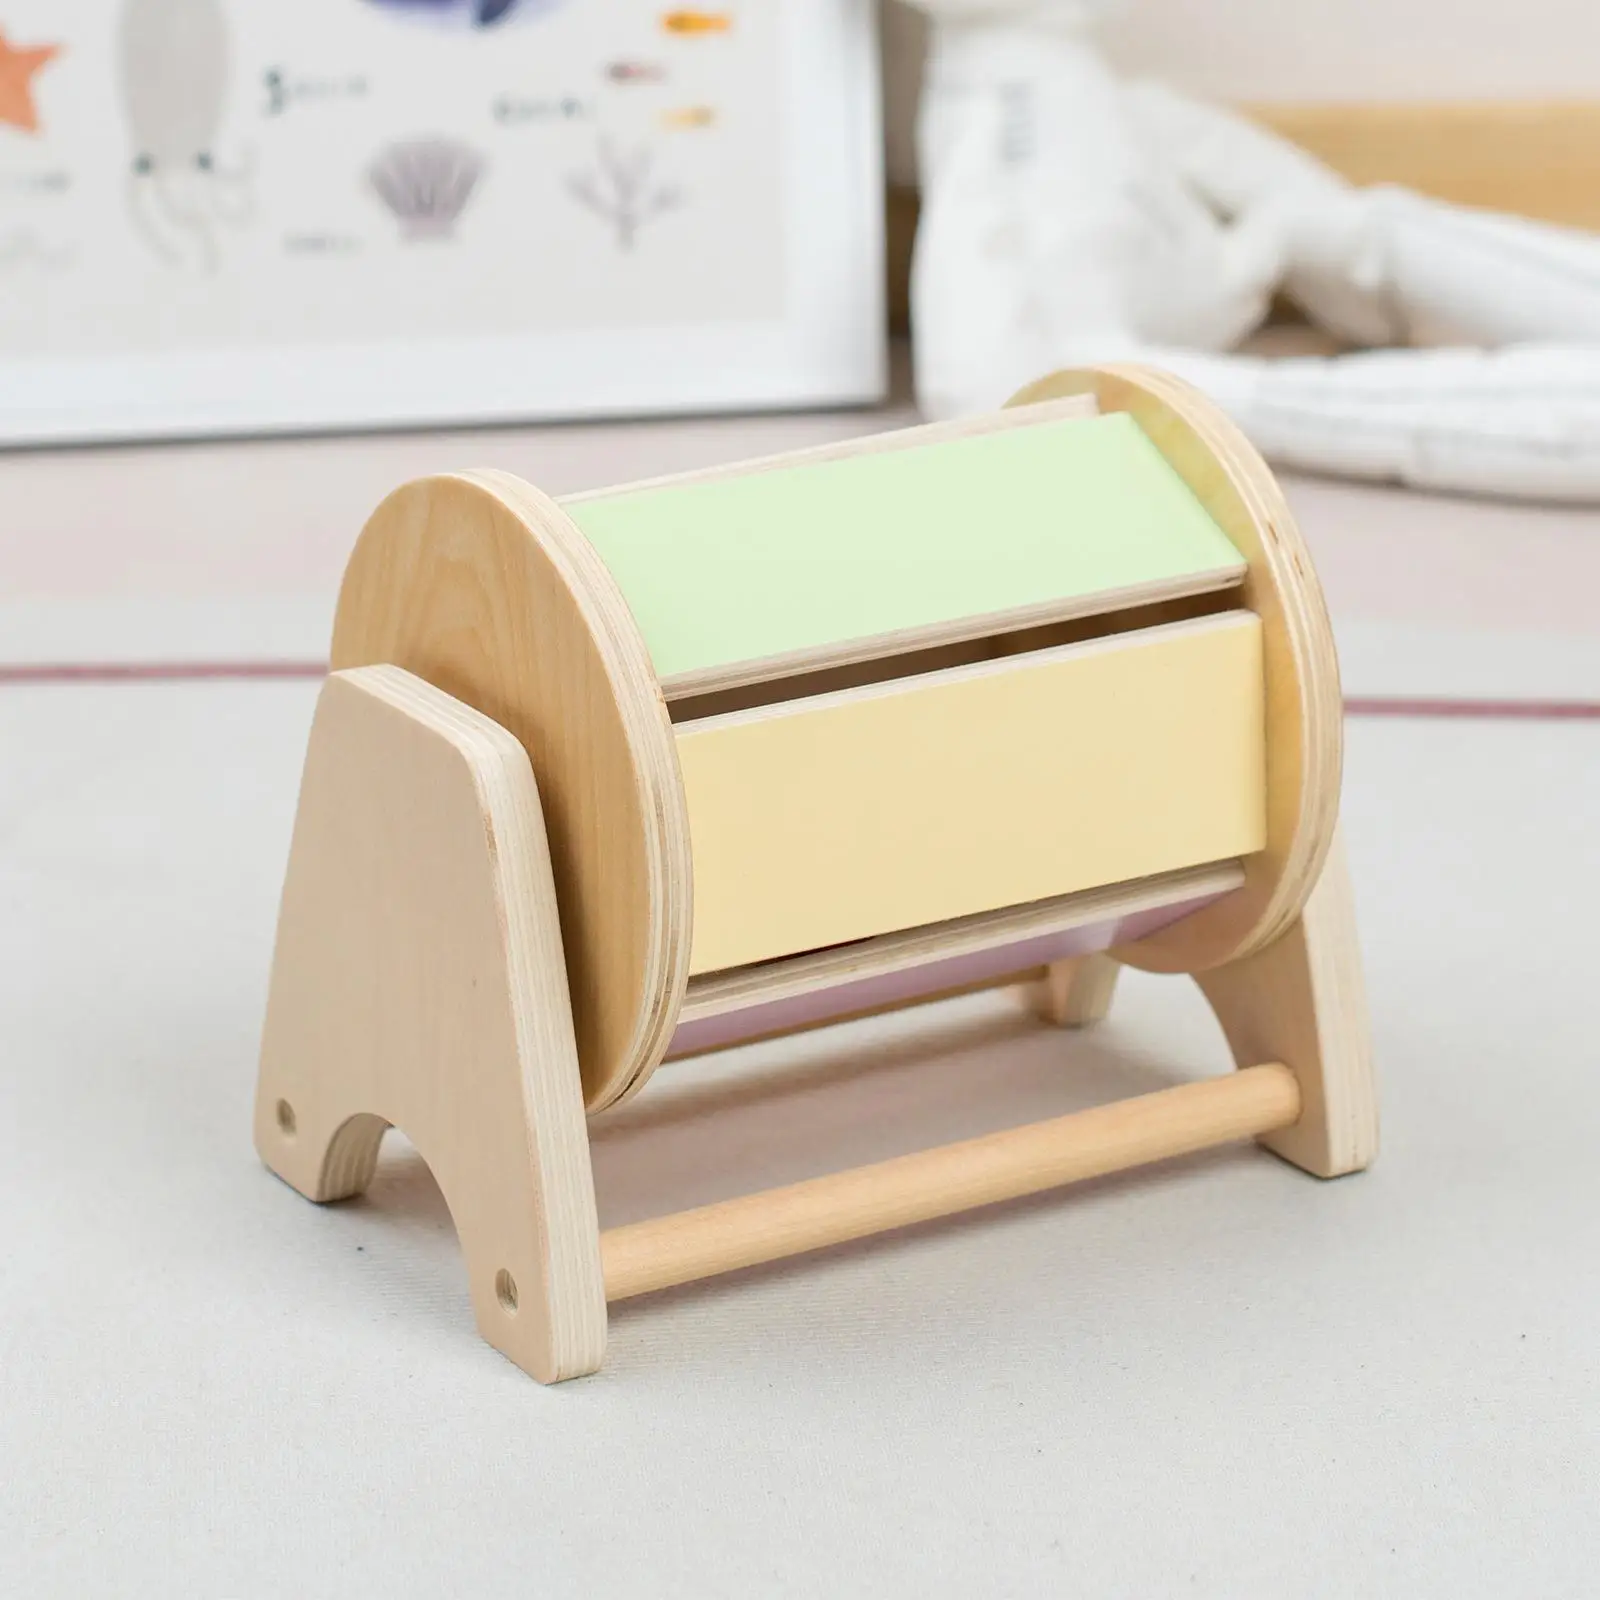 Wooden Rolling Drum Roller Montessori Inspired Rotatable with Sensory Audible Bells Drum for Kids Infant Boys Girls 1-3 Year Old